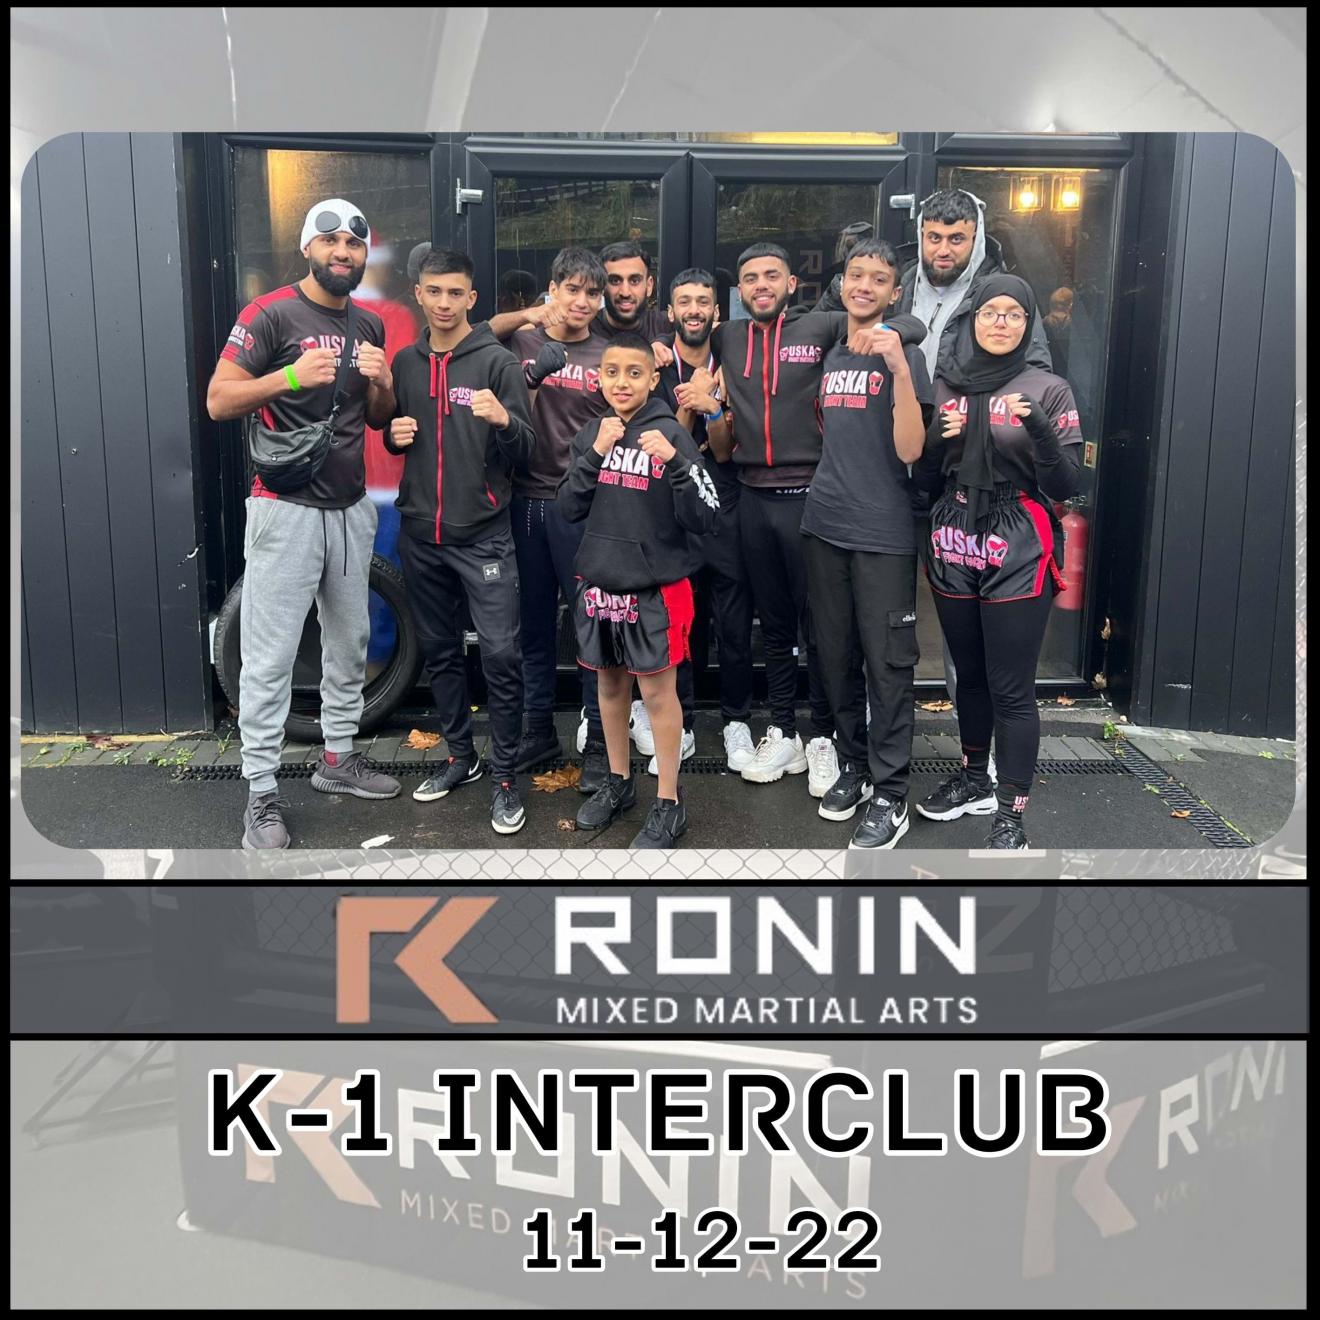 11-12-22 - Into the cage for the USKA Fight Team at the Ronin MMA K-1 Interclub